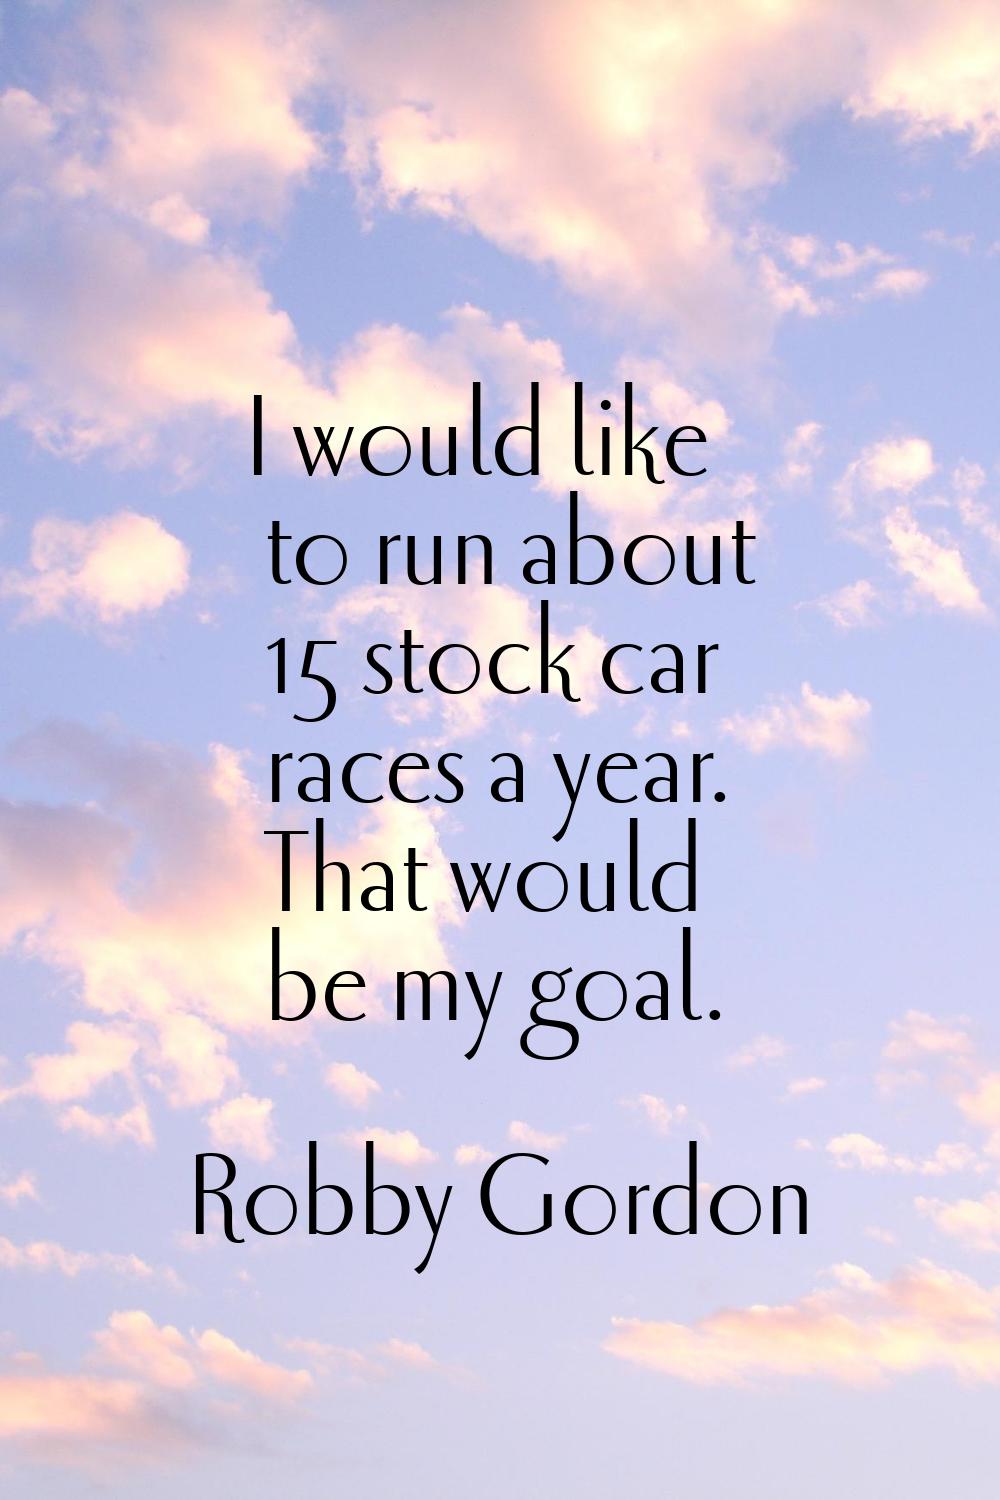 I would like to run about 15 stock car races a year. That would be my goal.